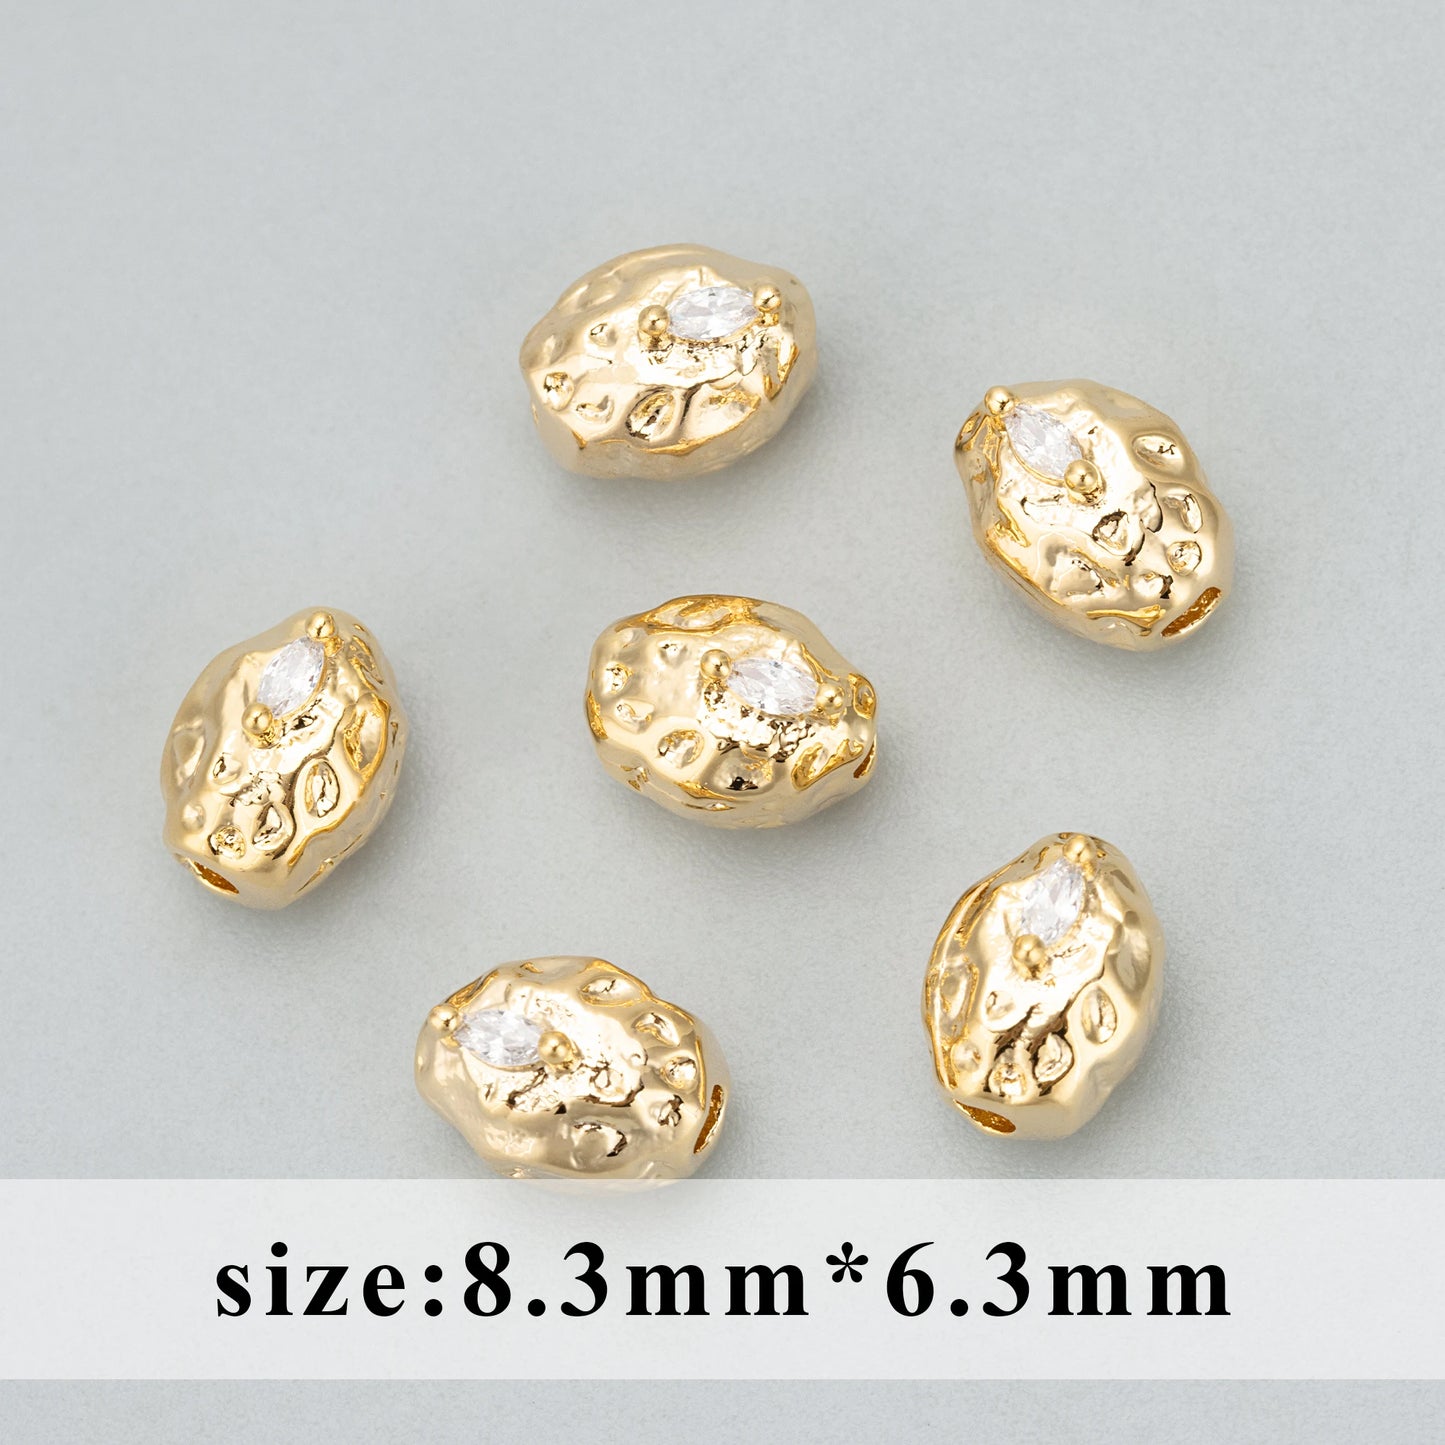 GUFEATHER ME07,jewelry accessories,18k gold rhodium plated,copper,nickel free,zircon,charms,jewelry making,diy pendant,10pcs/lot